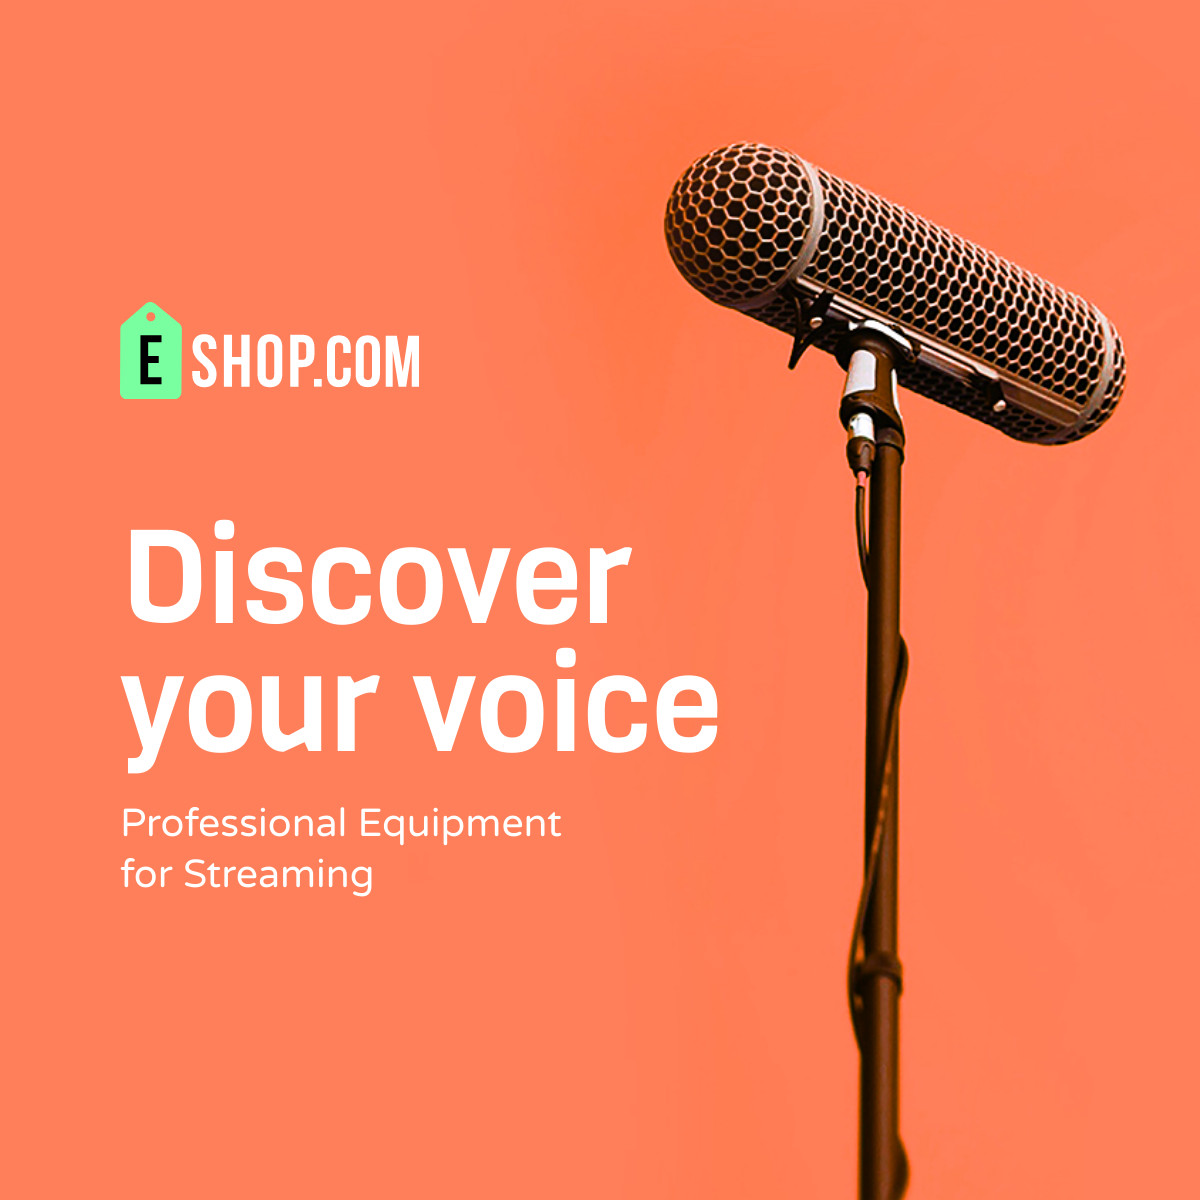 Discover Your Voice Streaming Equipment  Inline Rectangle 300x250